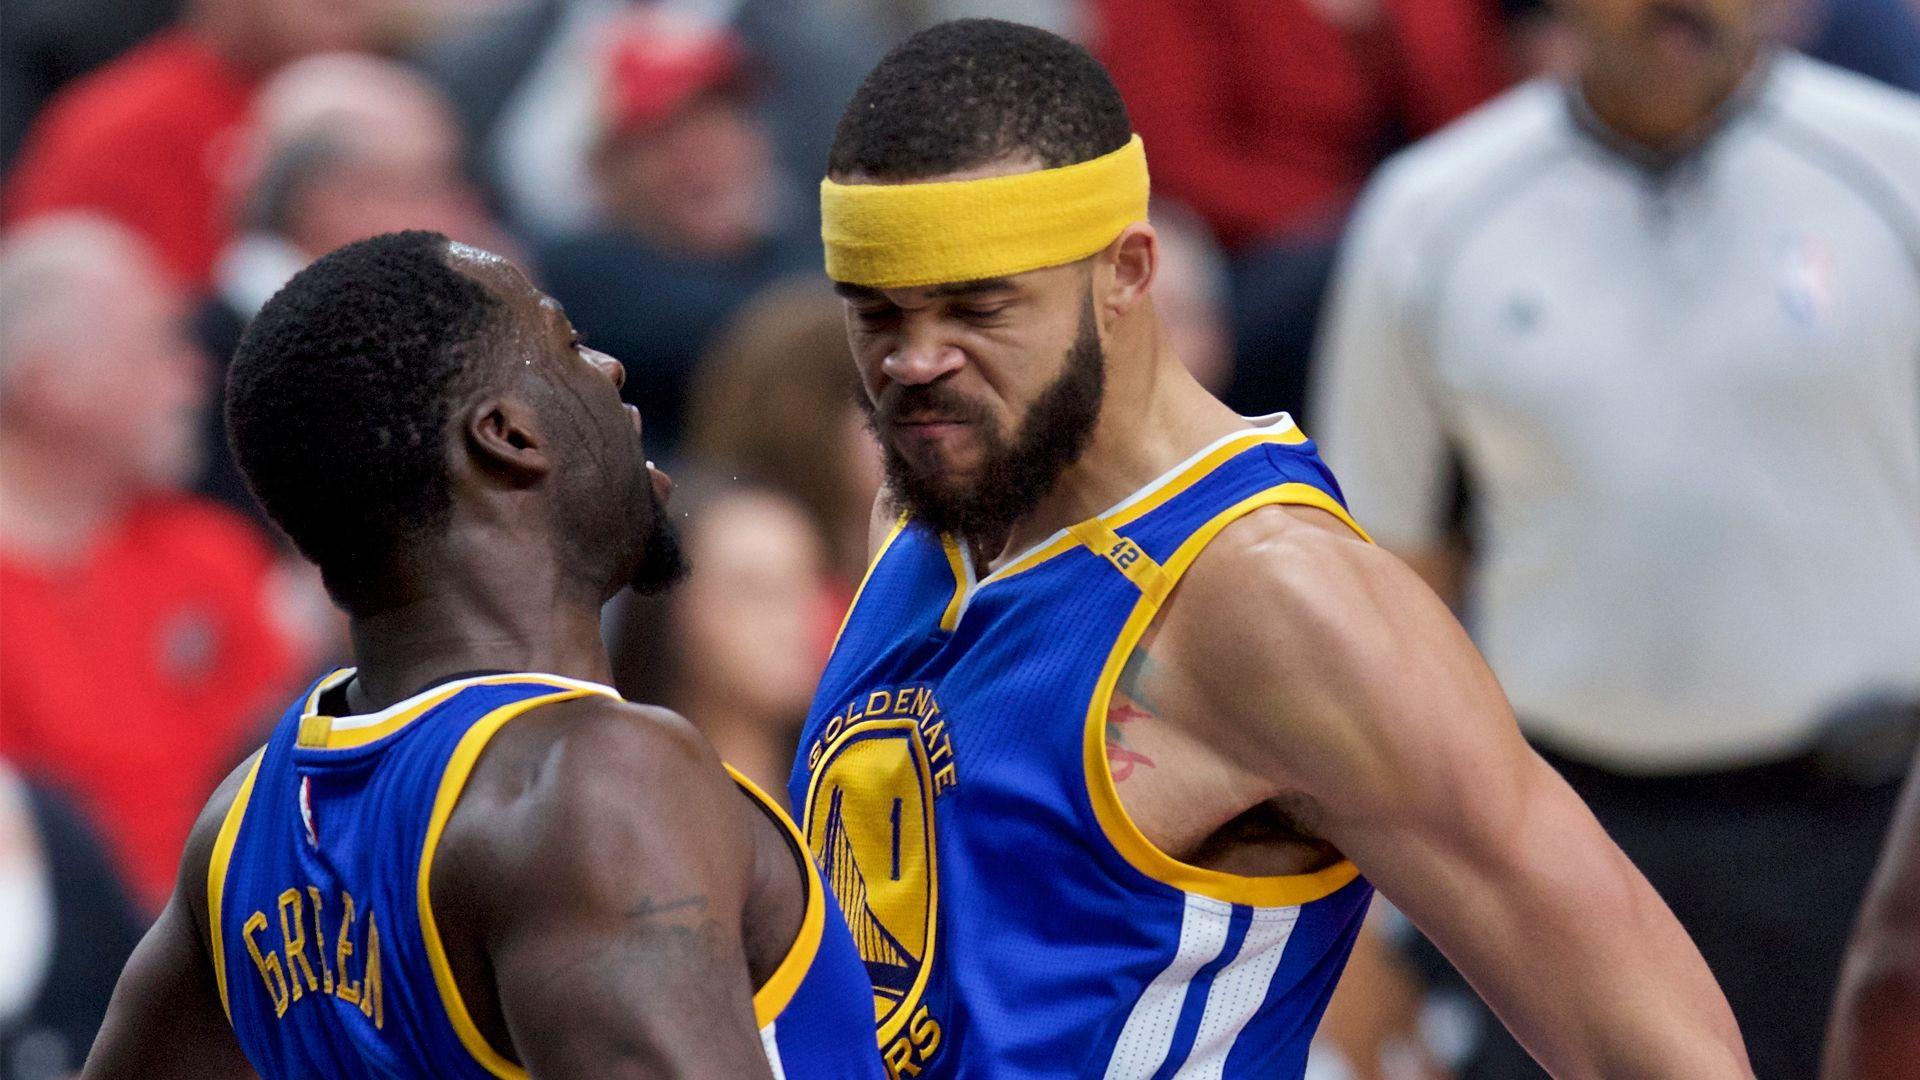 From lowlight shows to highlight shows: Warriors saved JaVale's